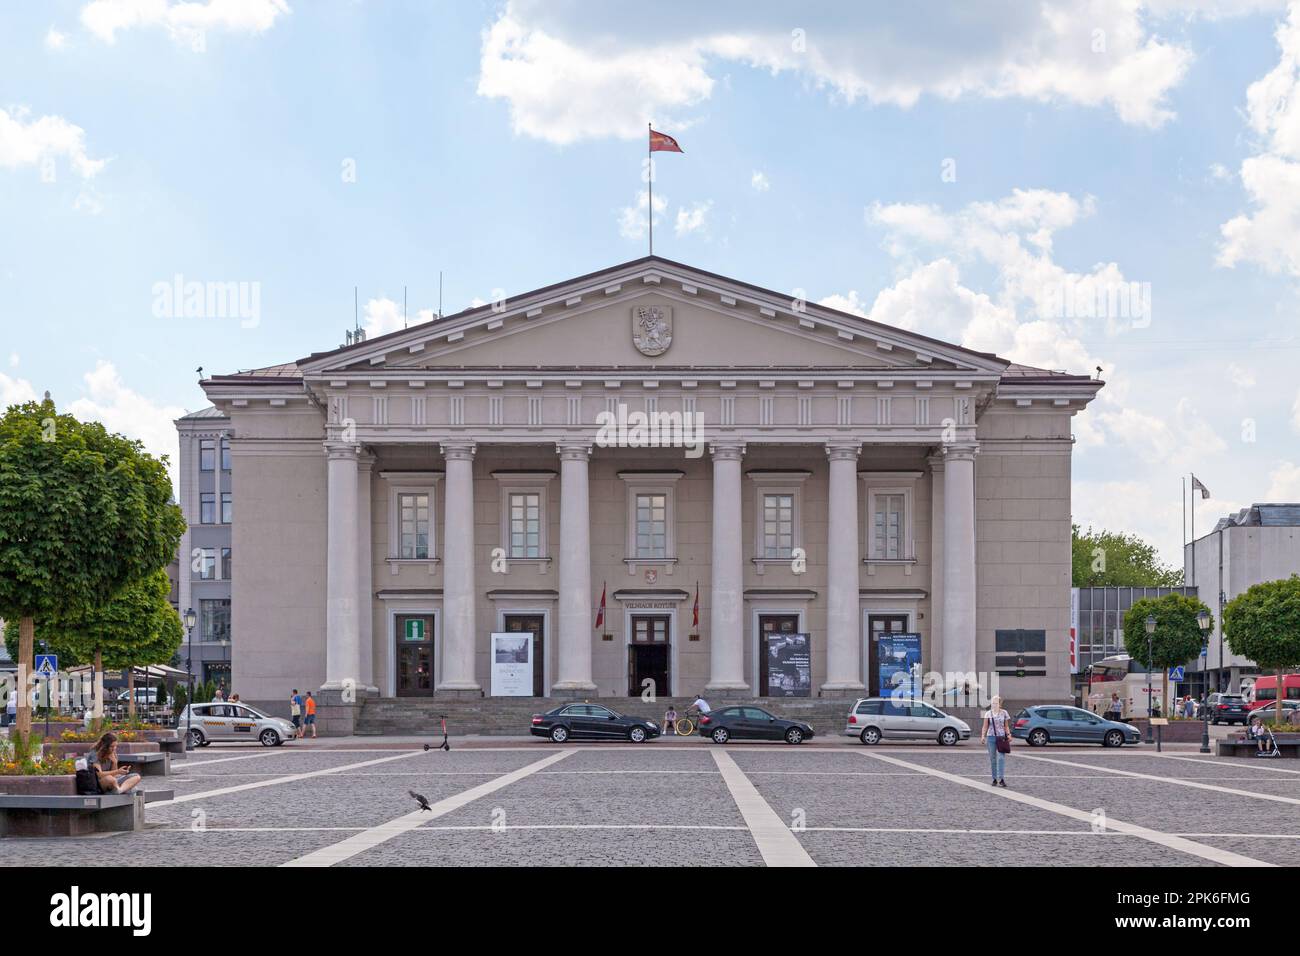 Vilnius, Lithuania - April 14 2019: The Vilnius Town Hall (Lithuanian: Vilniaus rotušė) is a historical town hall in the square of the same name in th Stock Photo